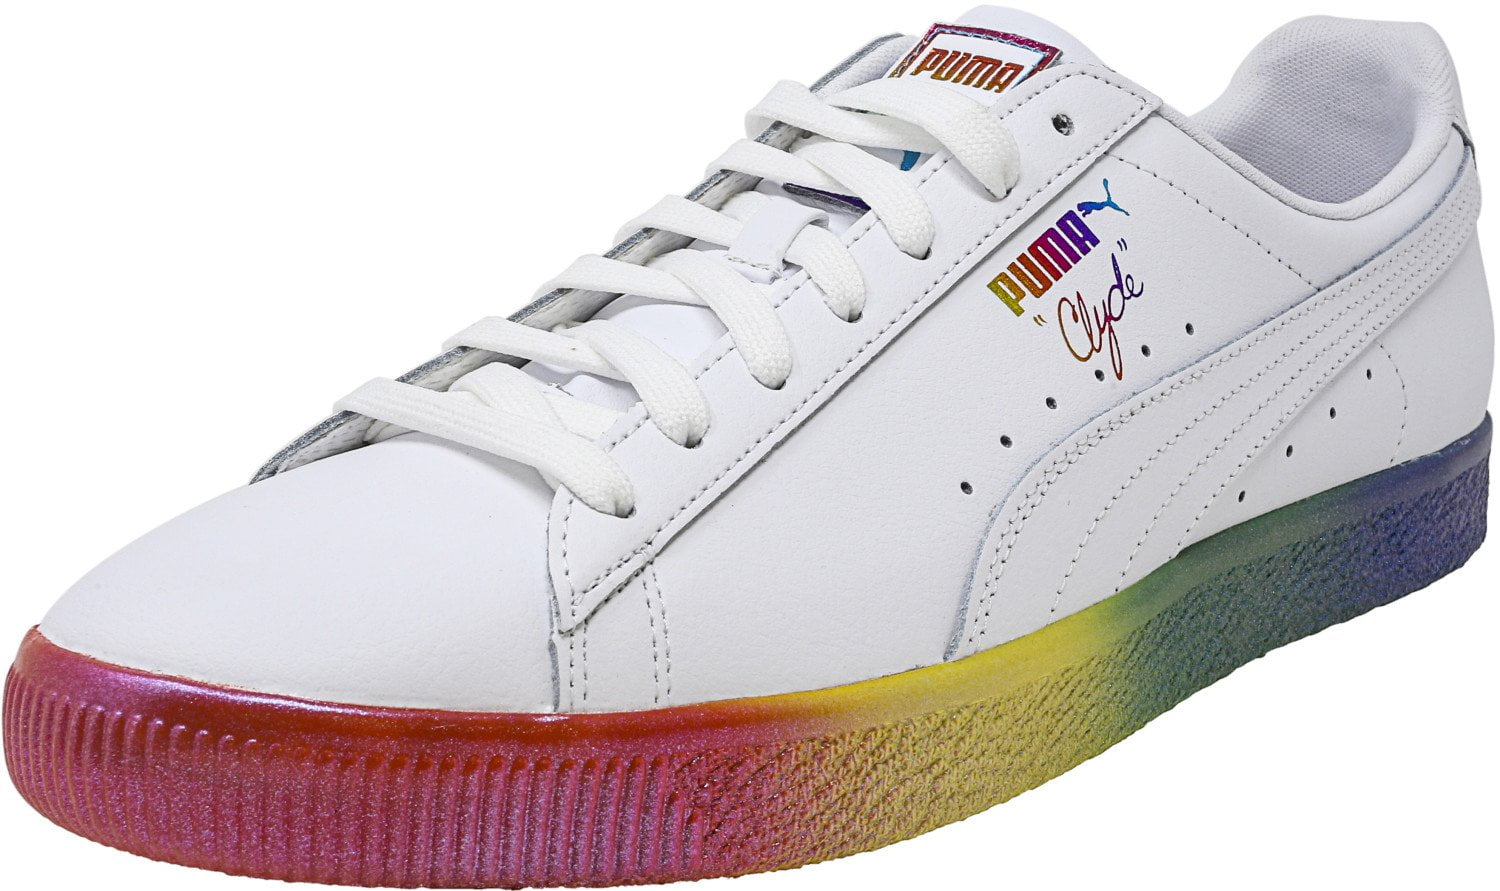 Puma Men's Clyde Prd White Ankle-High Leather Sneaker - 9.5M | Walmart ...